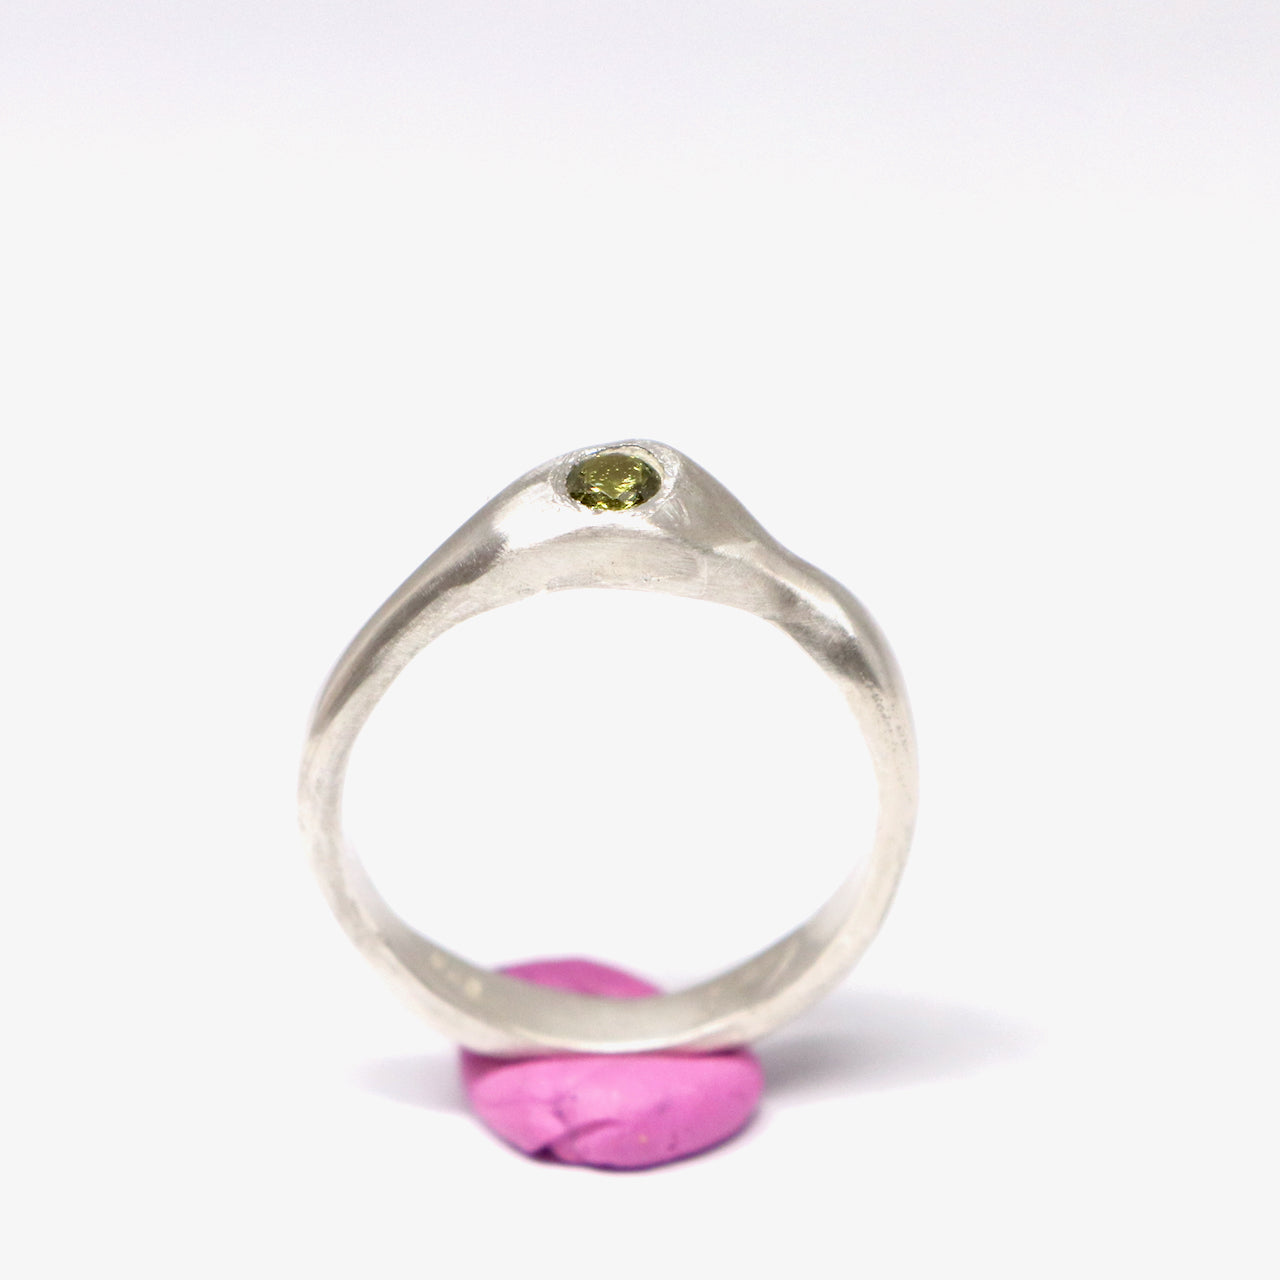 Cubic zirconia silver ring. Made in Wanaka. Unique, colourful jewellery designed and crafted by New Zealand artist and jeweller Briar Hardy-Hesson.